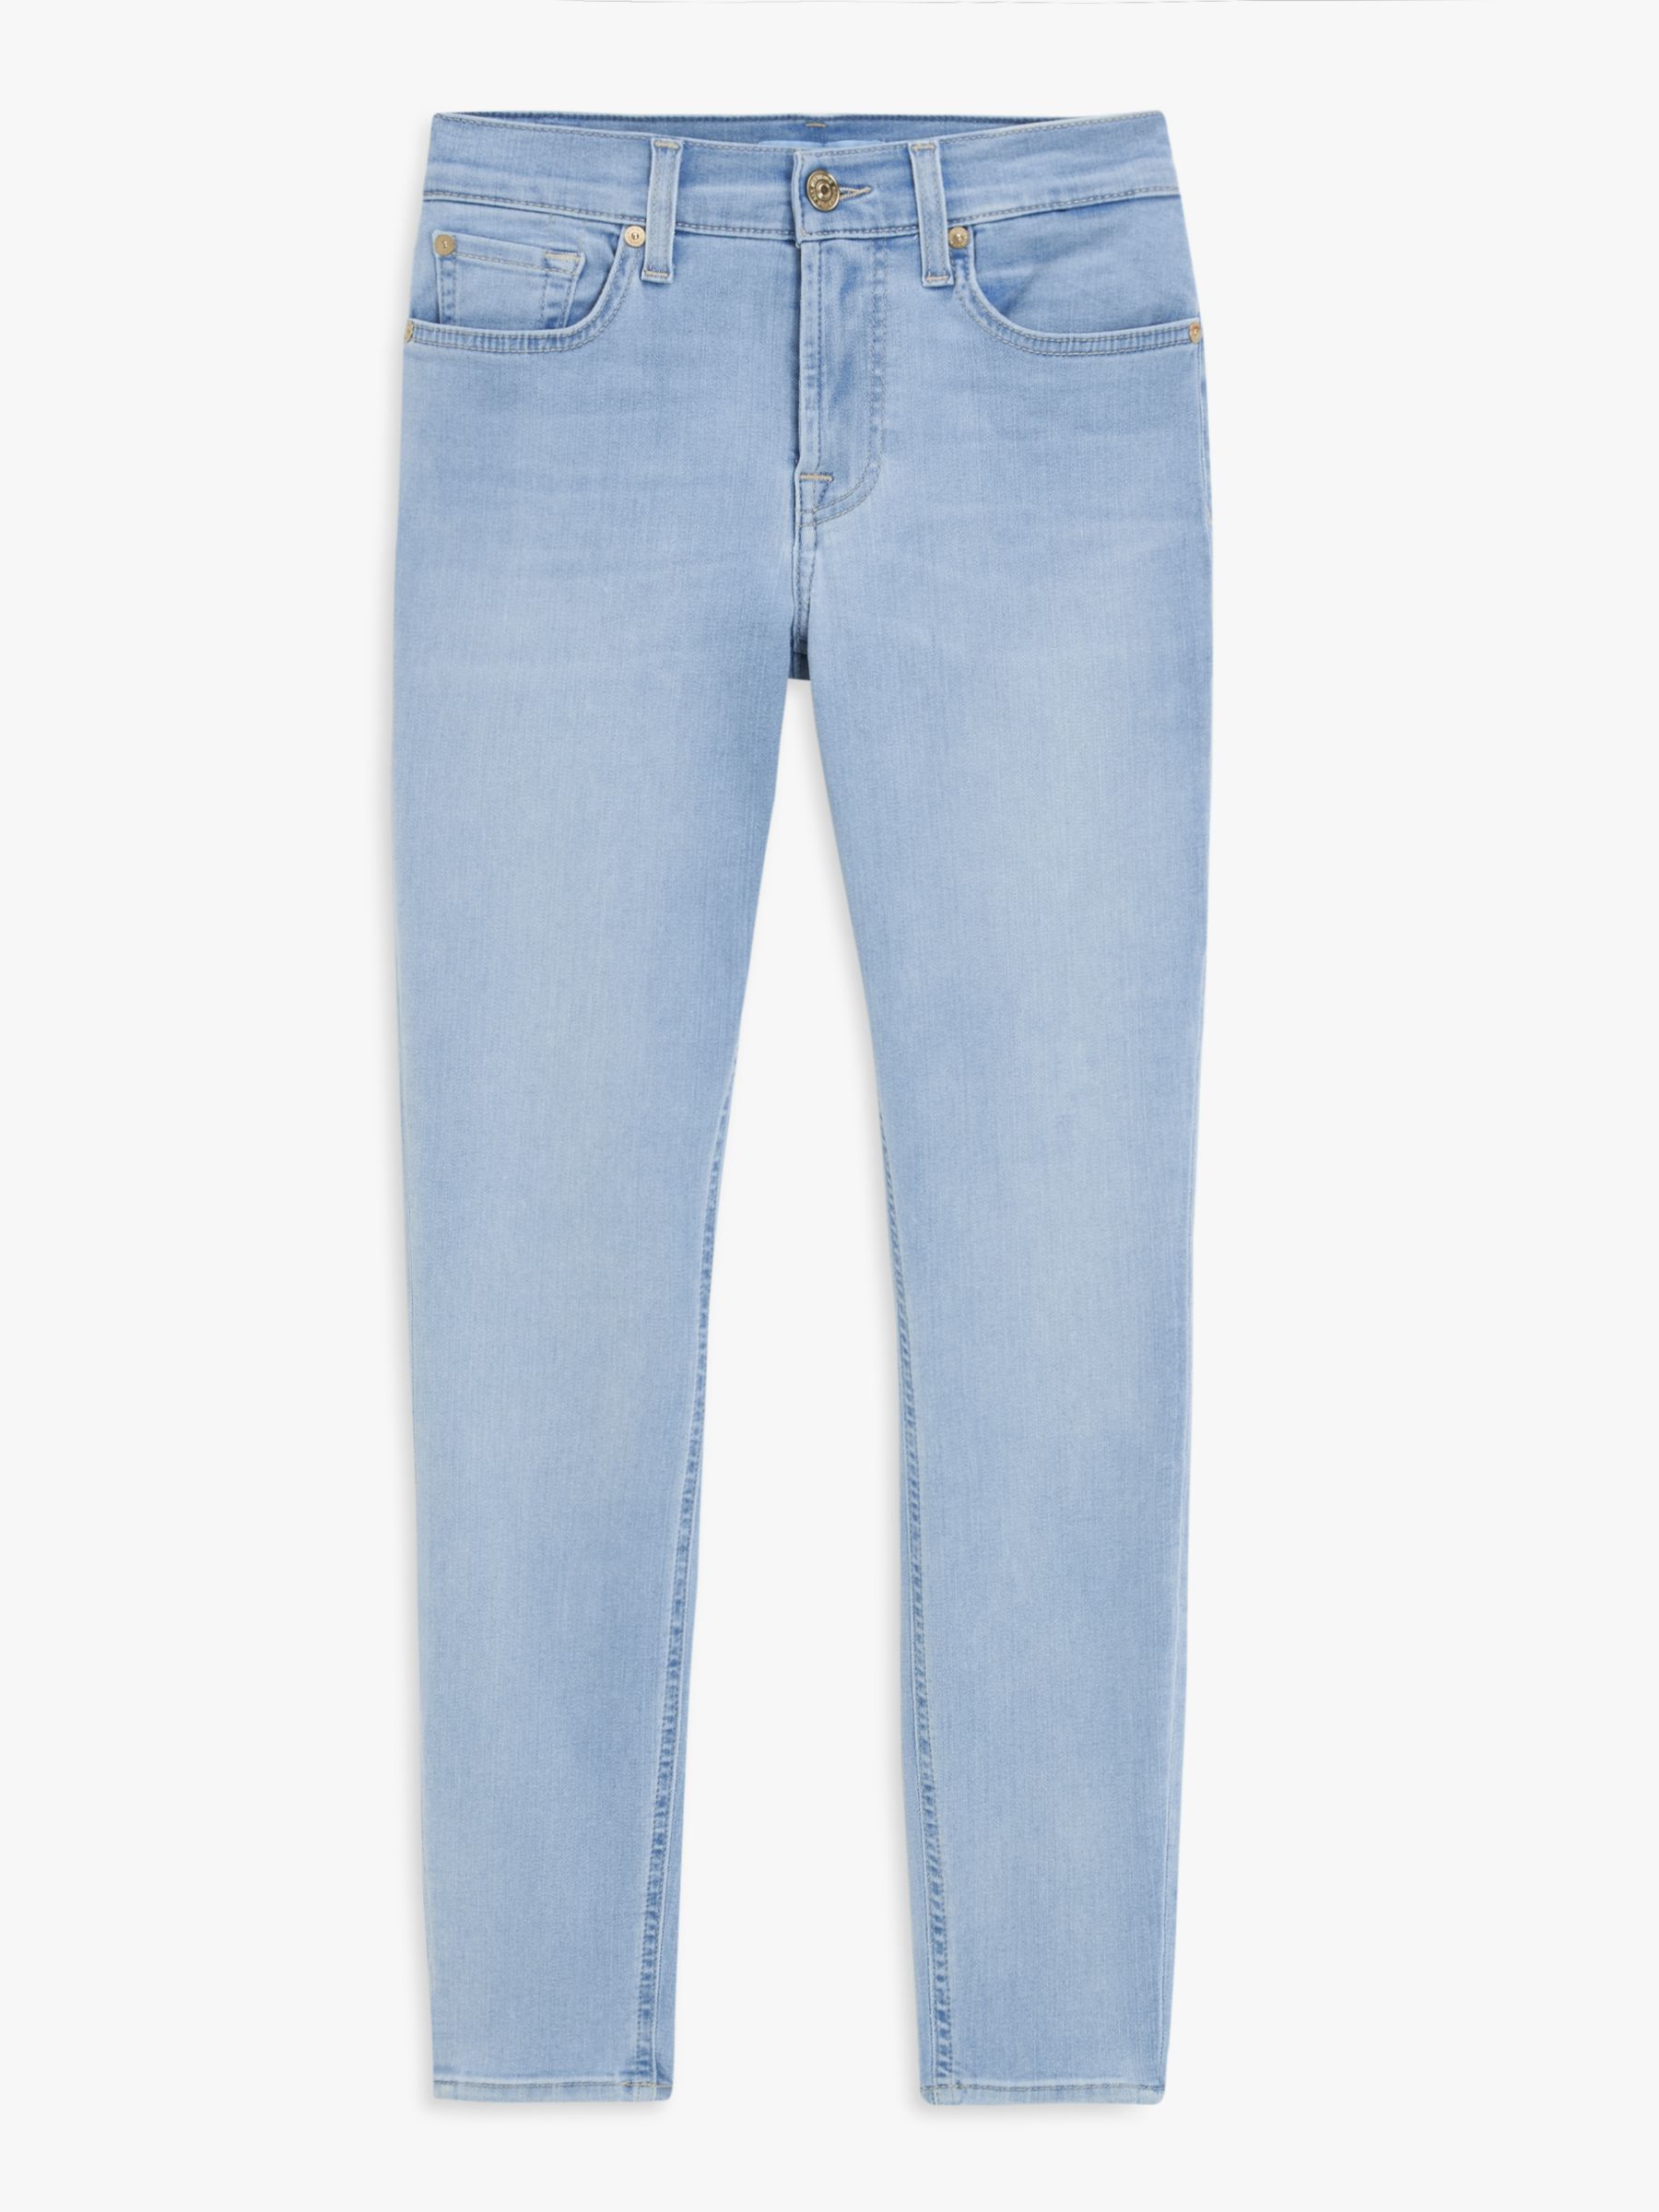 Buy 7 For All Mankind Skinny B(Air) Jeans Online at johnlewis.com